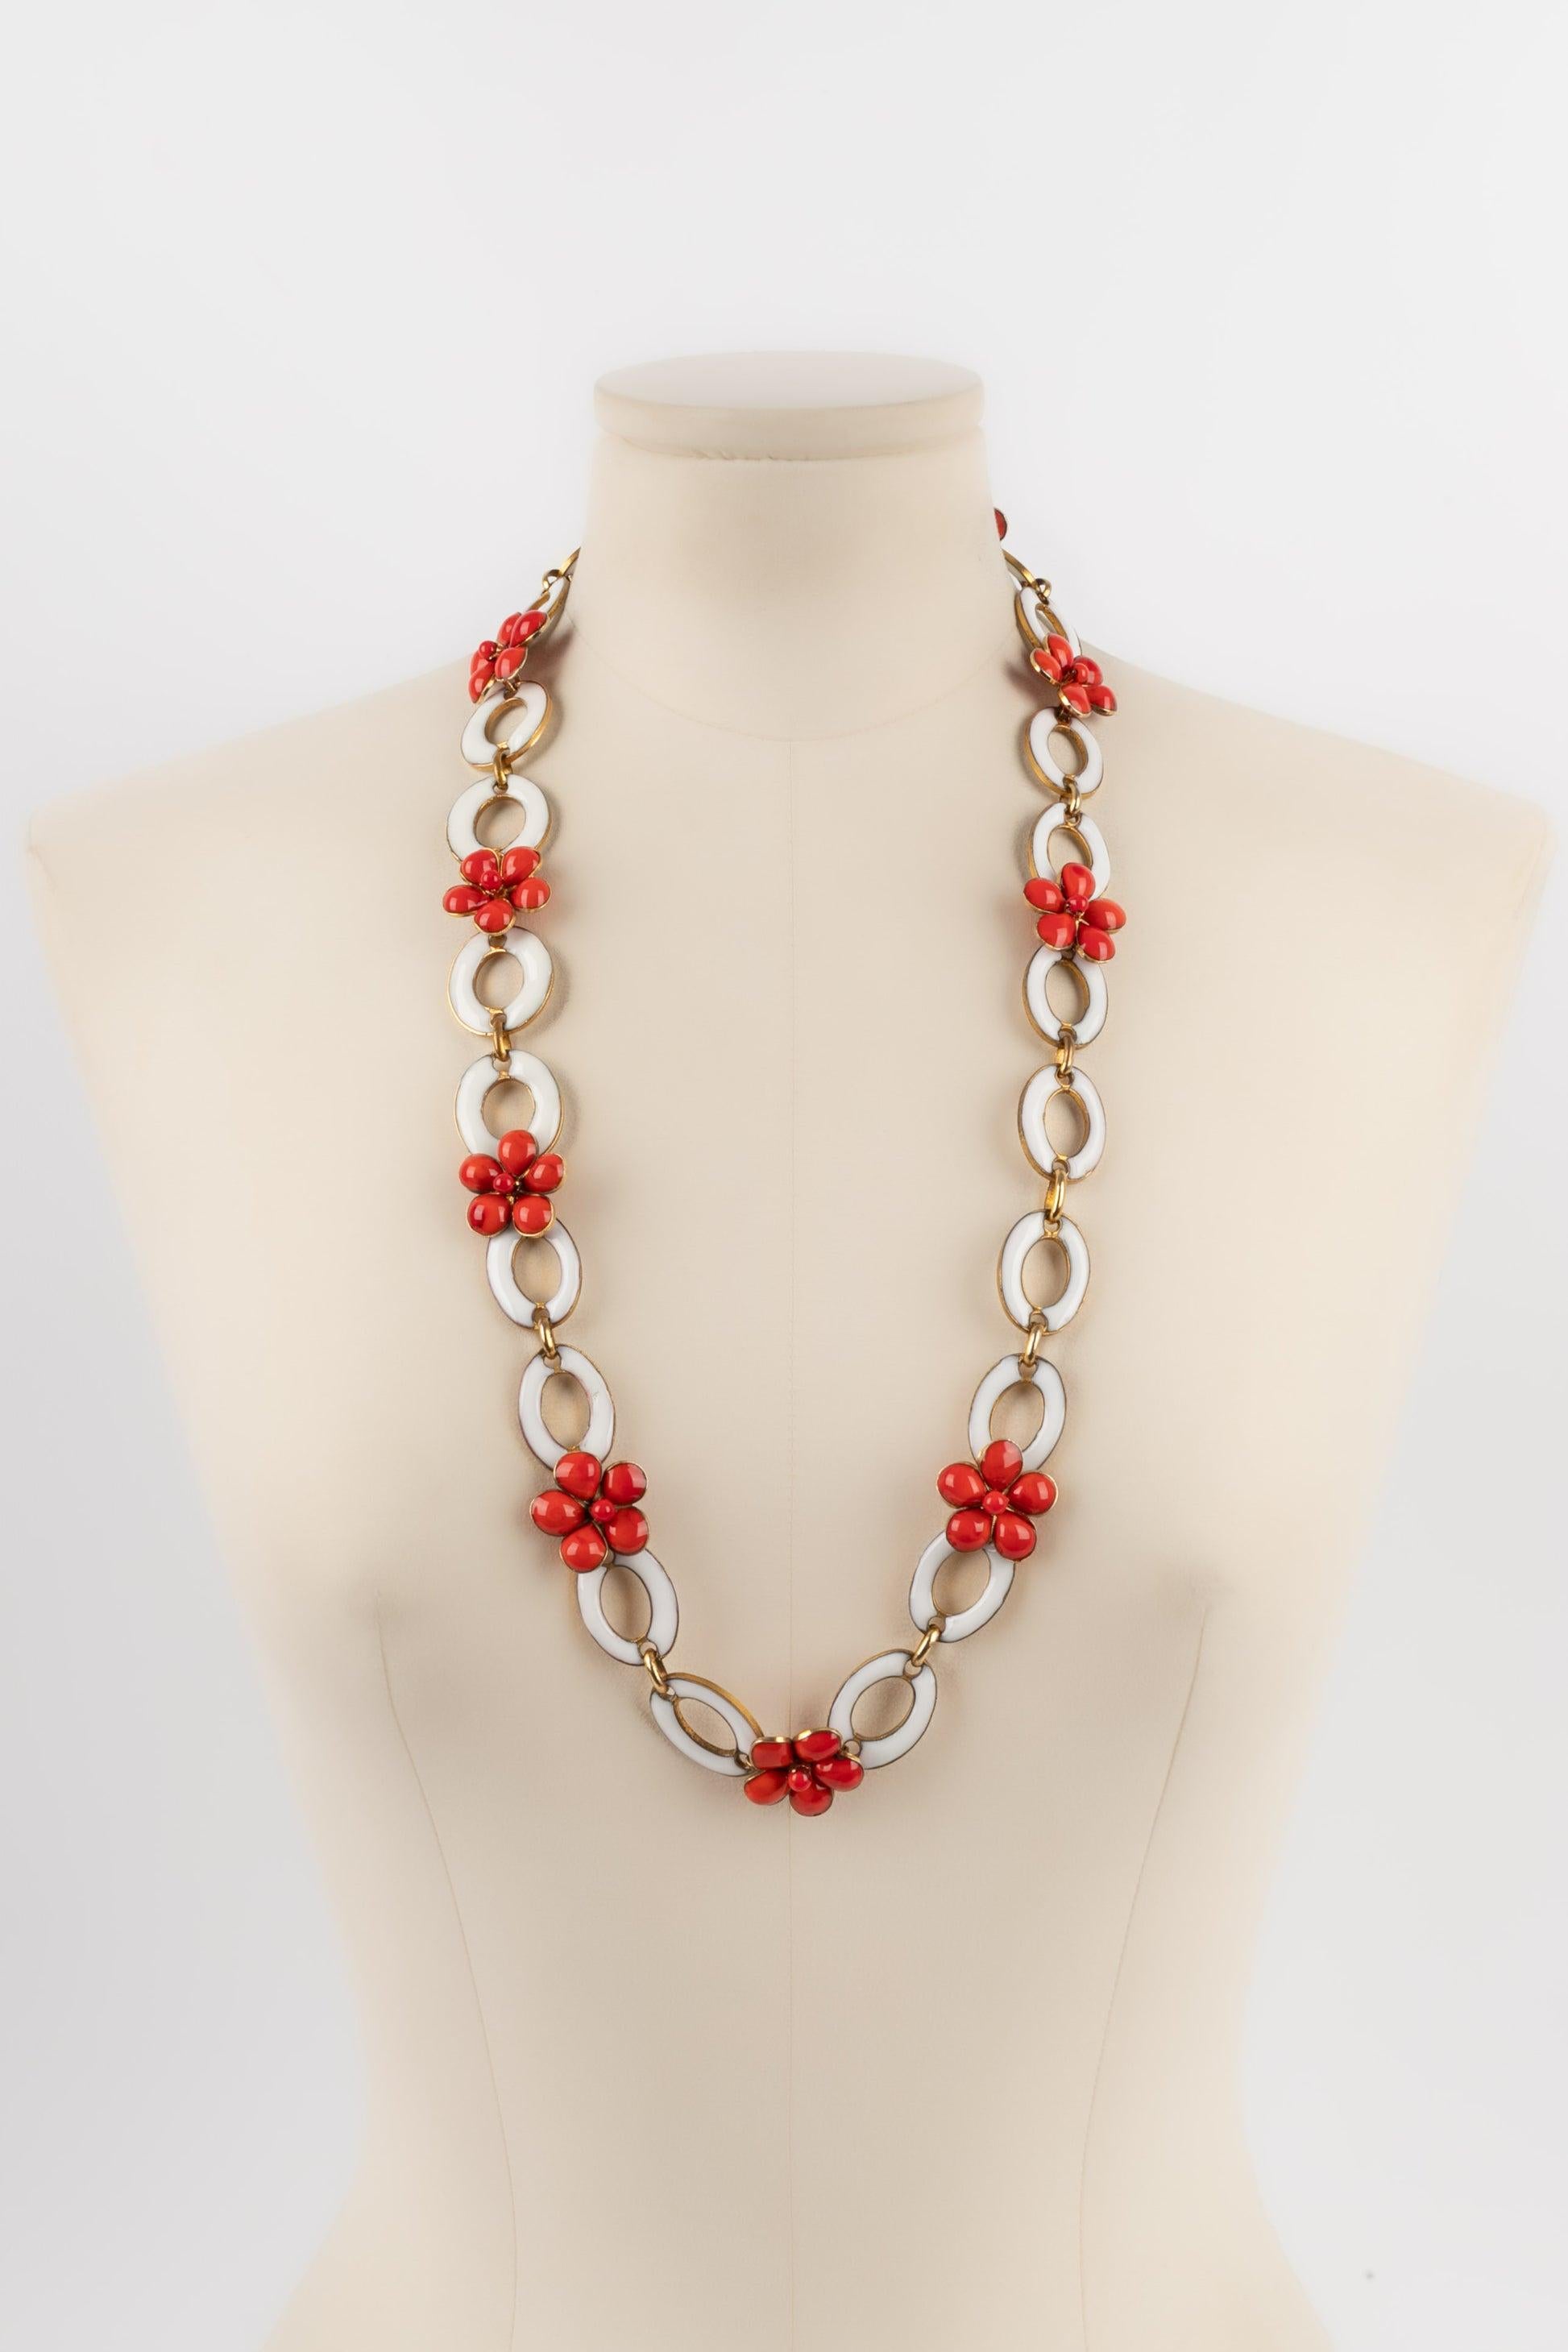 Gripoix - (Made in France) Necklace in golden metal and glass paste. Unsigned jewelry, work of the Gripoix Atelier from the 1950s-1960s.

Additional information:
Condition: Very good condition
Dimensions: Length: 75 cm
Period: 20th Century

Seller